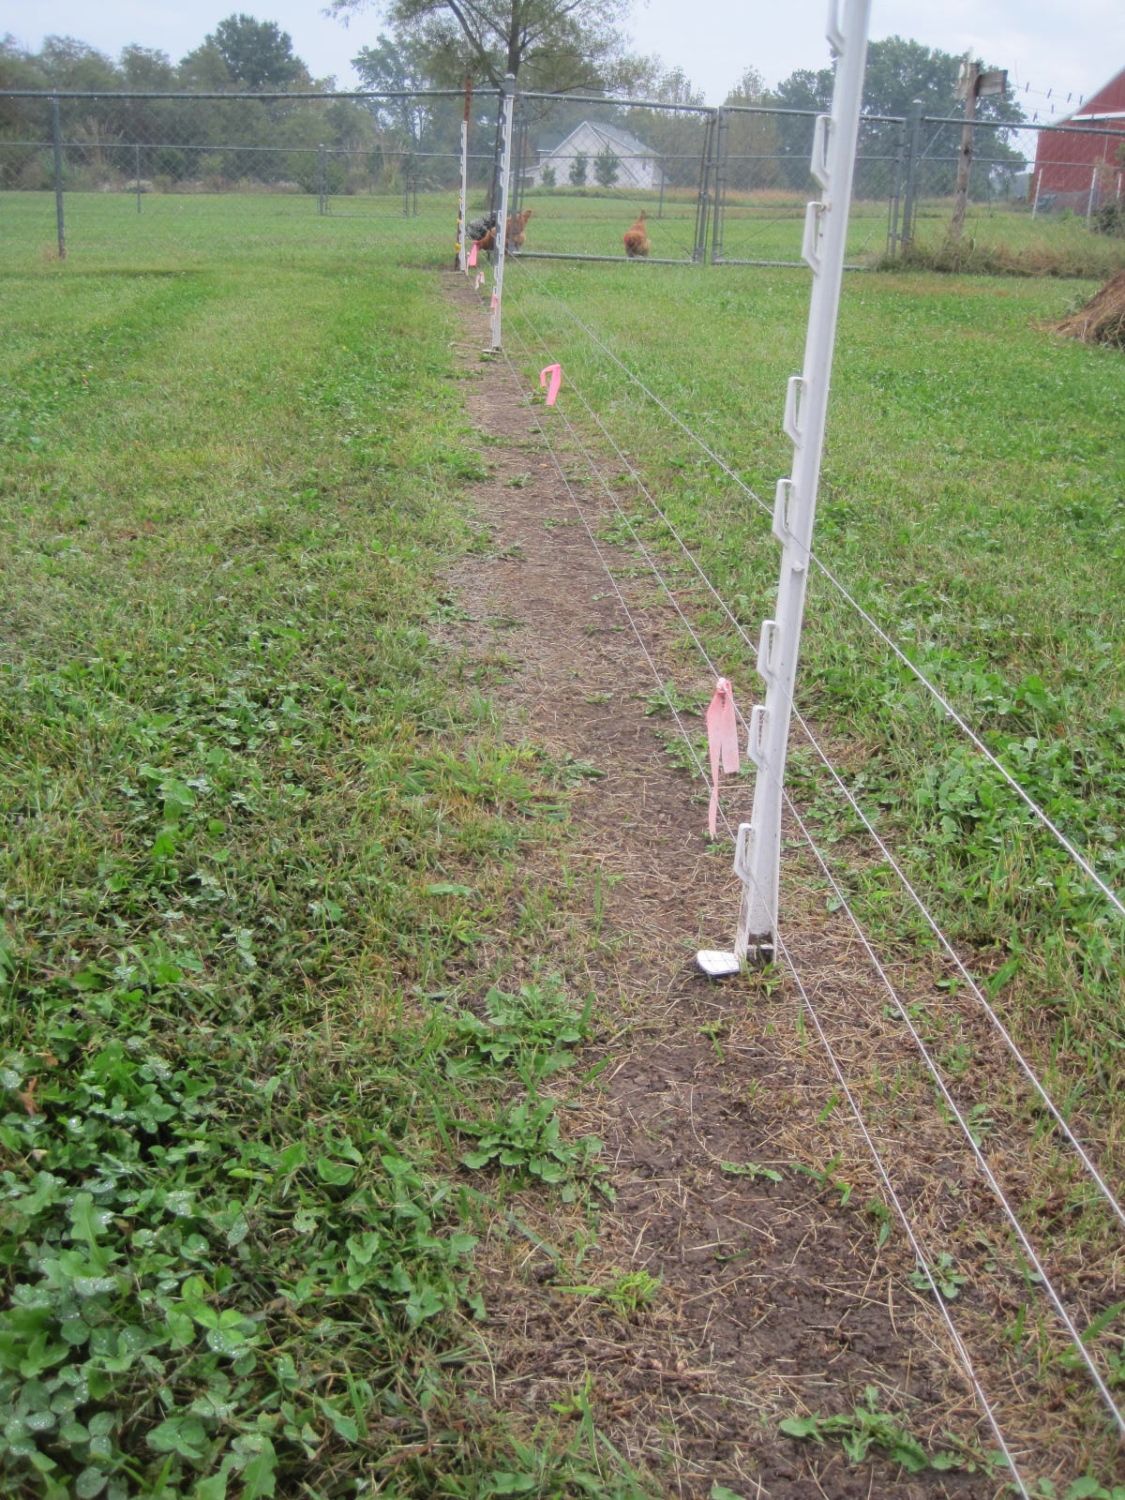 High Tensile Electric Fence Backyard Chickens Learn How To Raise